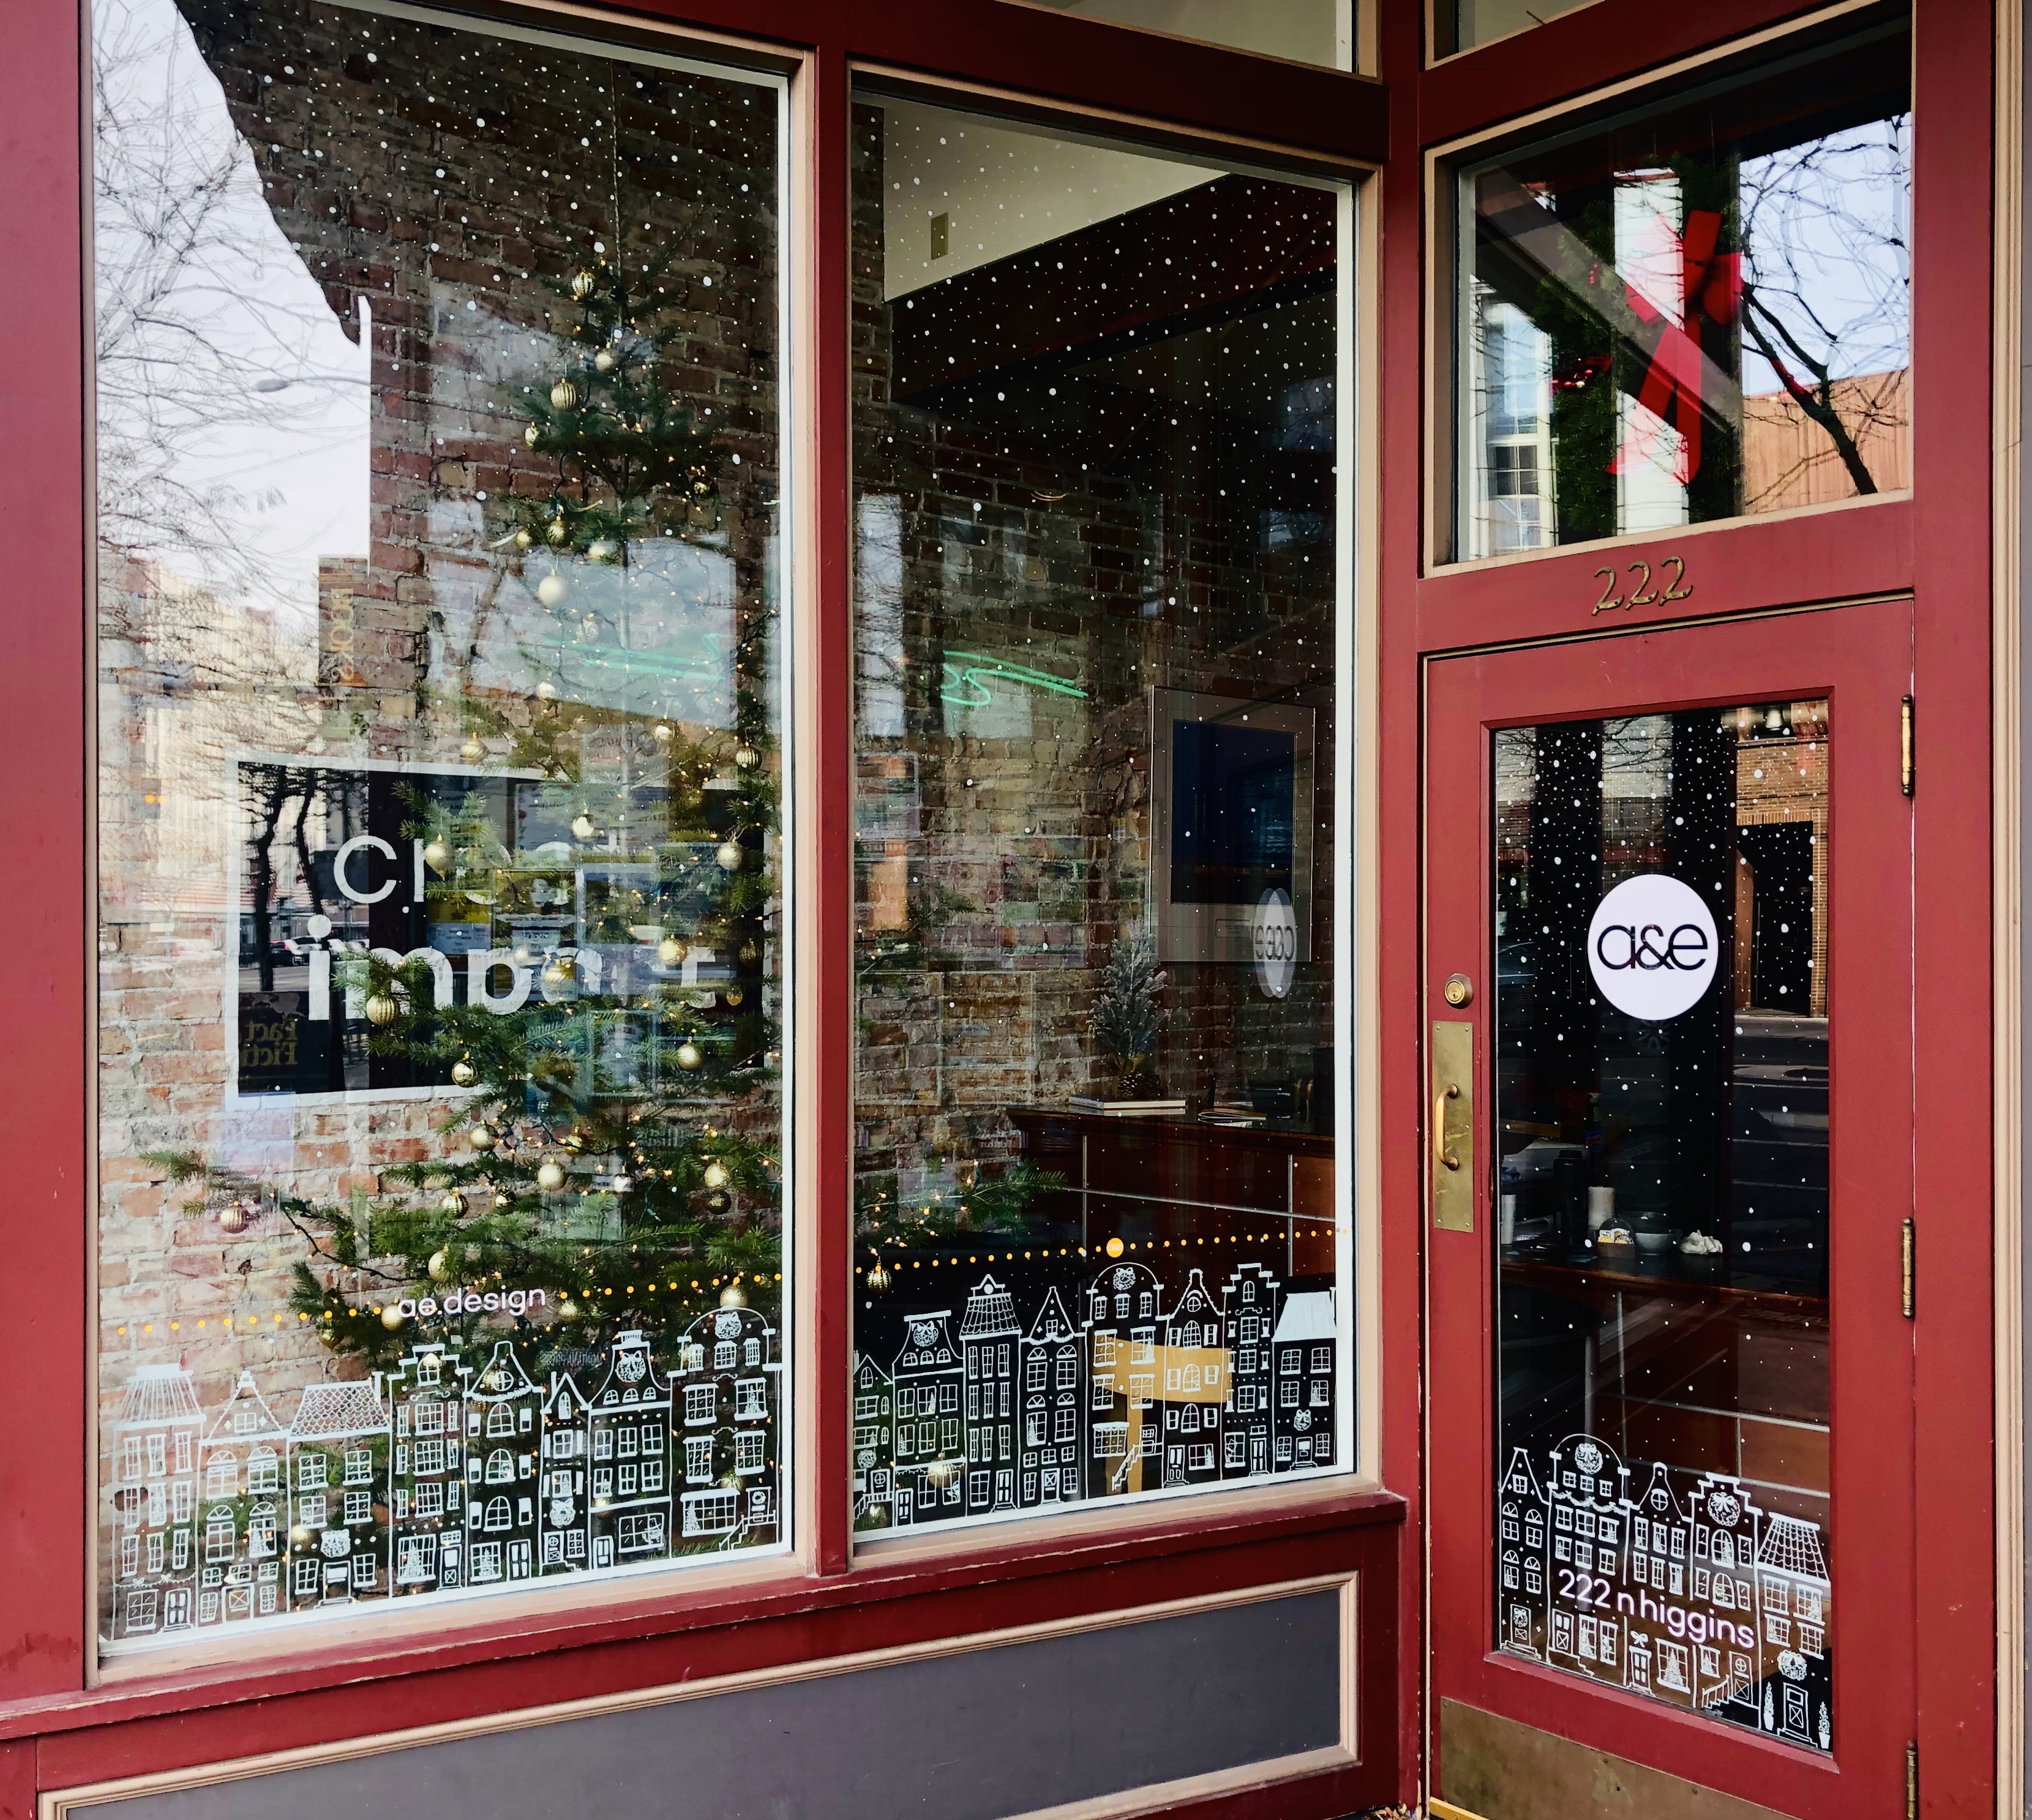 Downtown Holiday Window Decorating Contest - Downtown Missoula Partnership